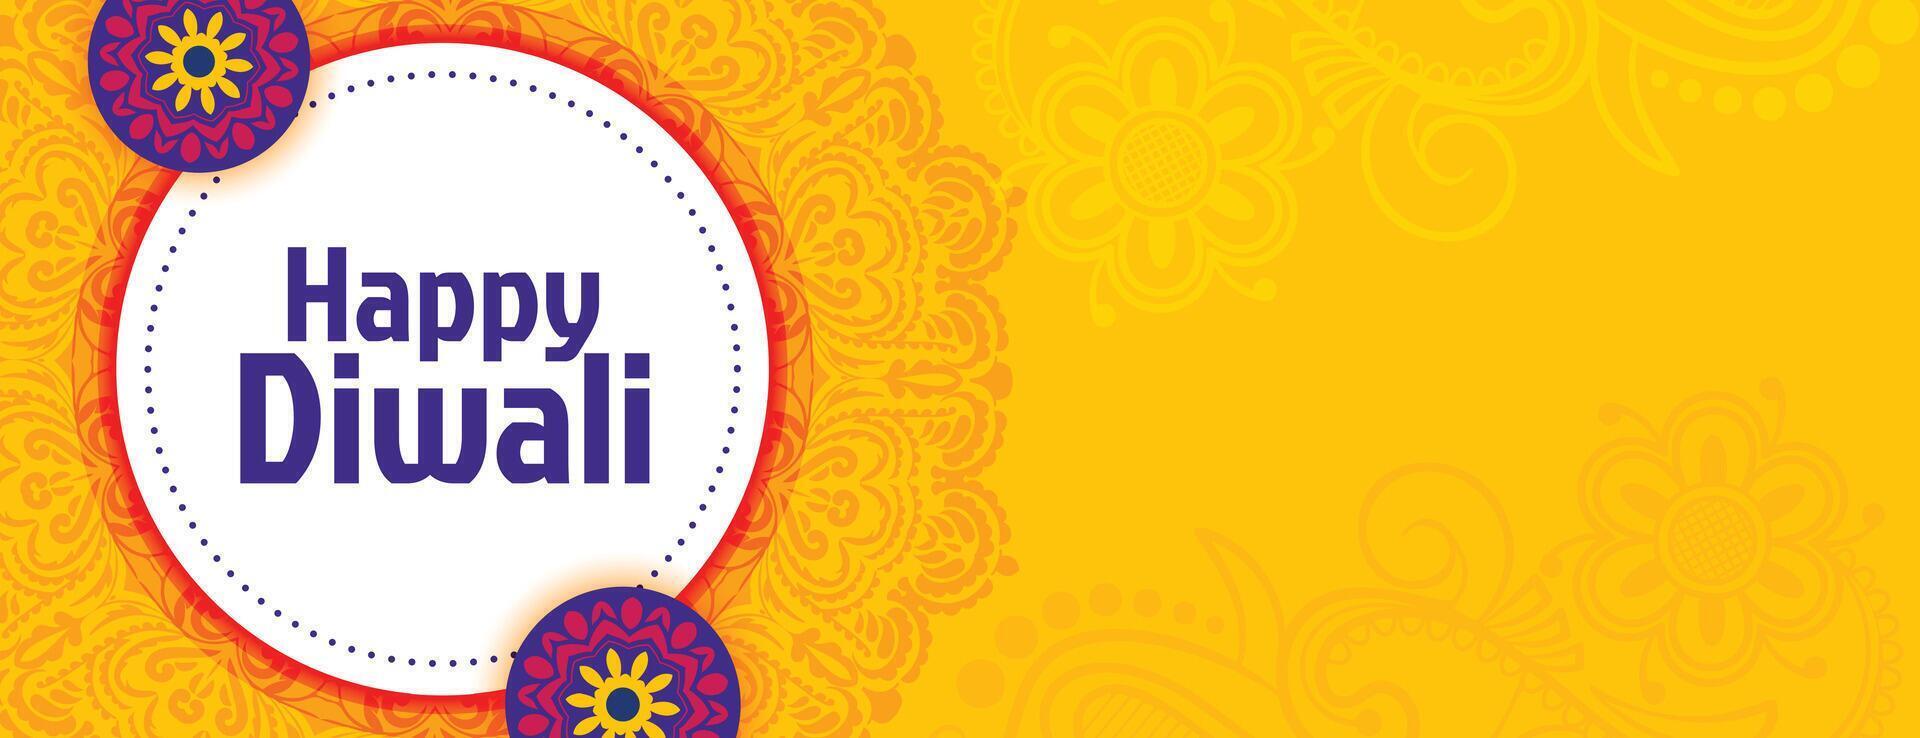 happy diwali banner with text space in mandala style vector